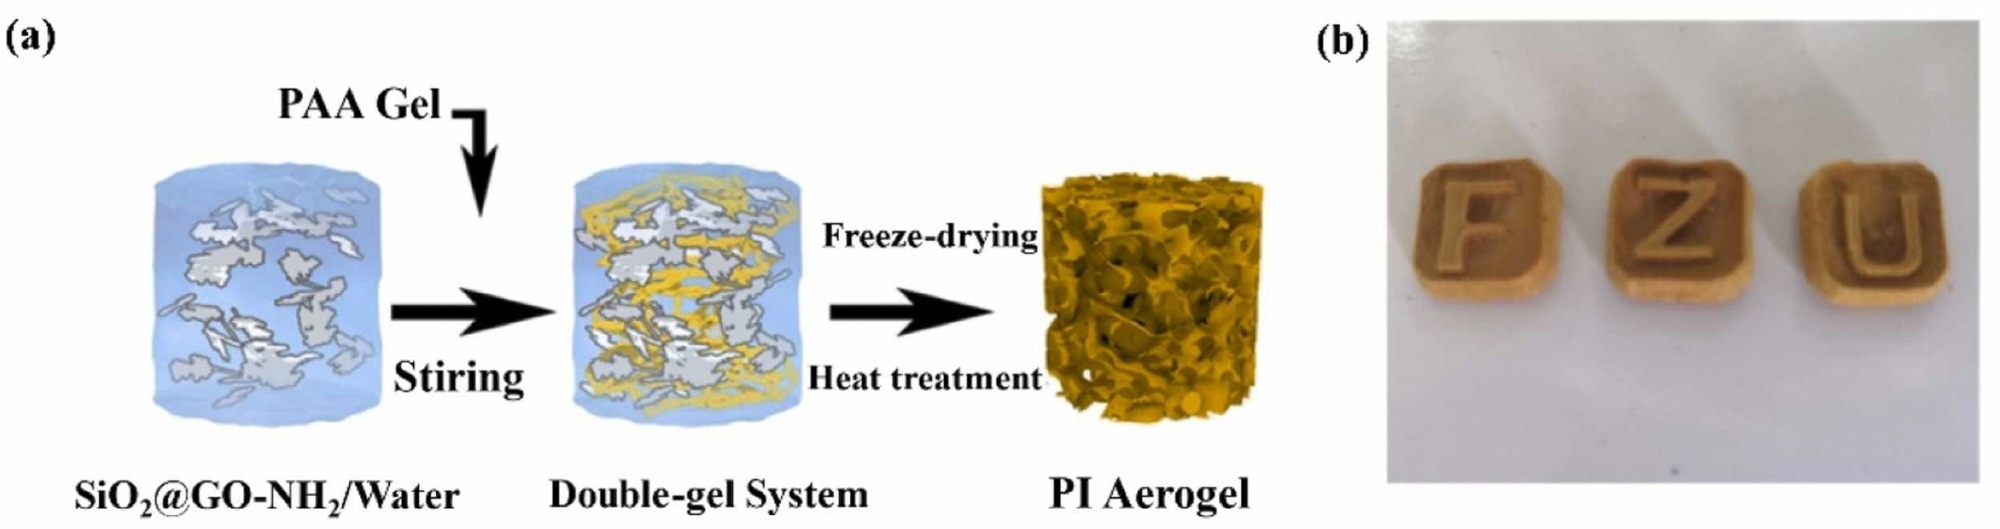 Aerogels in Low-Carbon Building for CO2 Adsorption